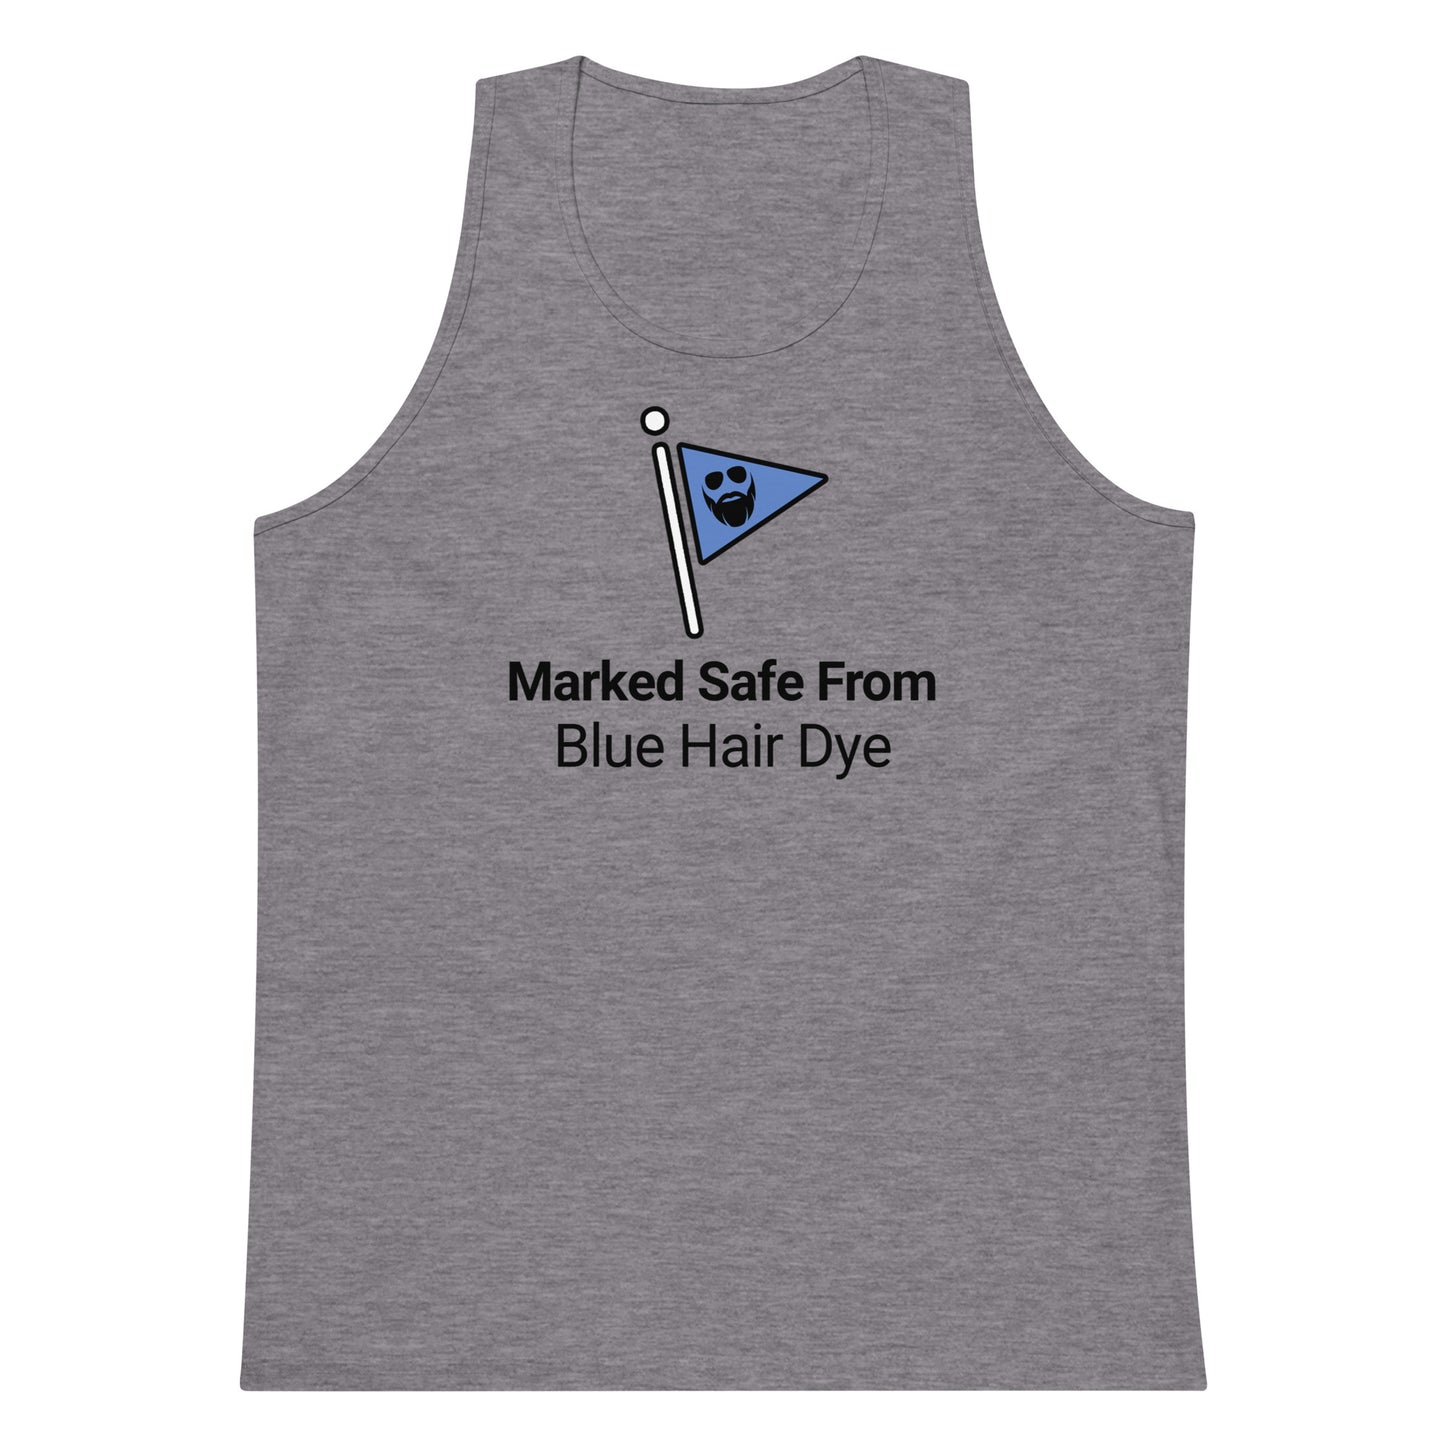 Marked Safe From Blue Hair Dye Premium Tank Top